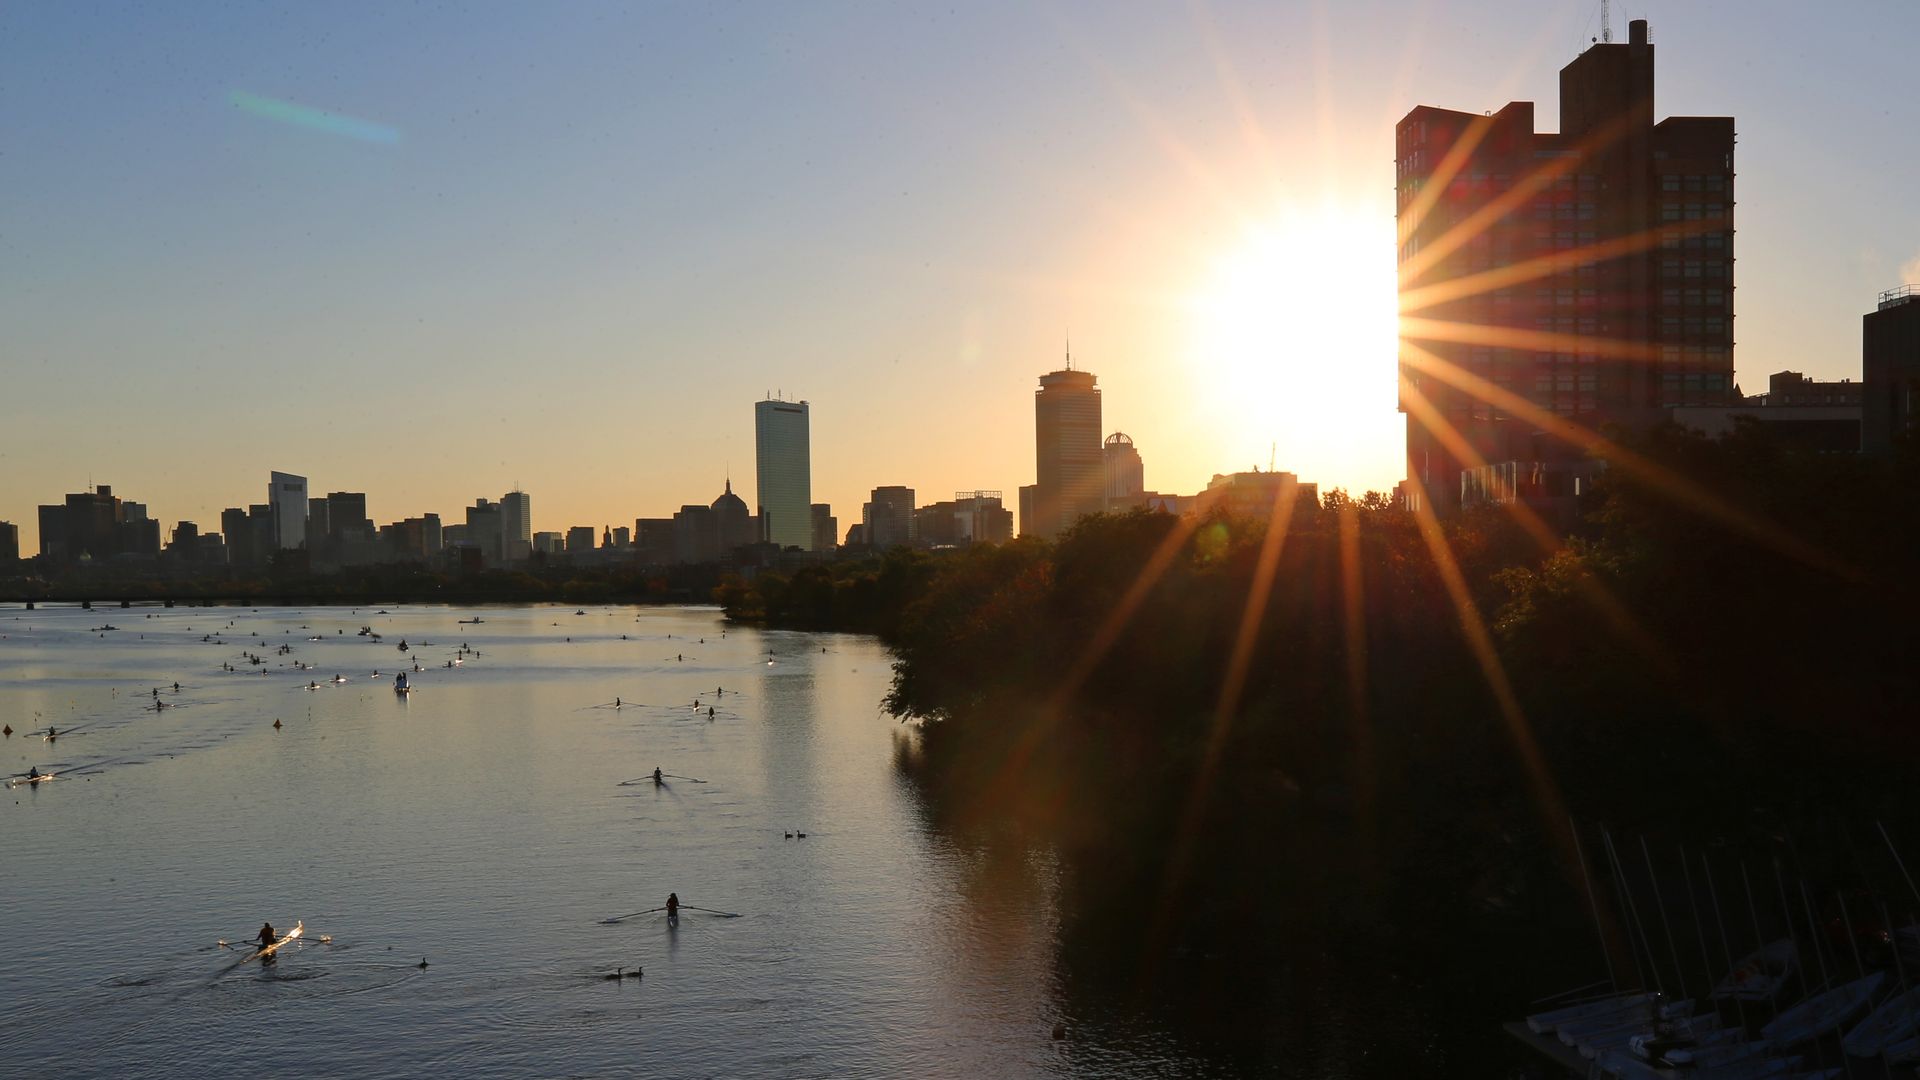 The sun shines over the Boston skyline as rowboats move on the Charles River.